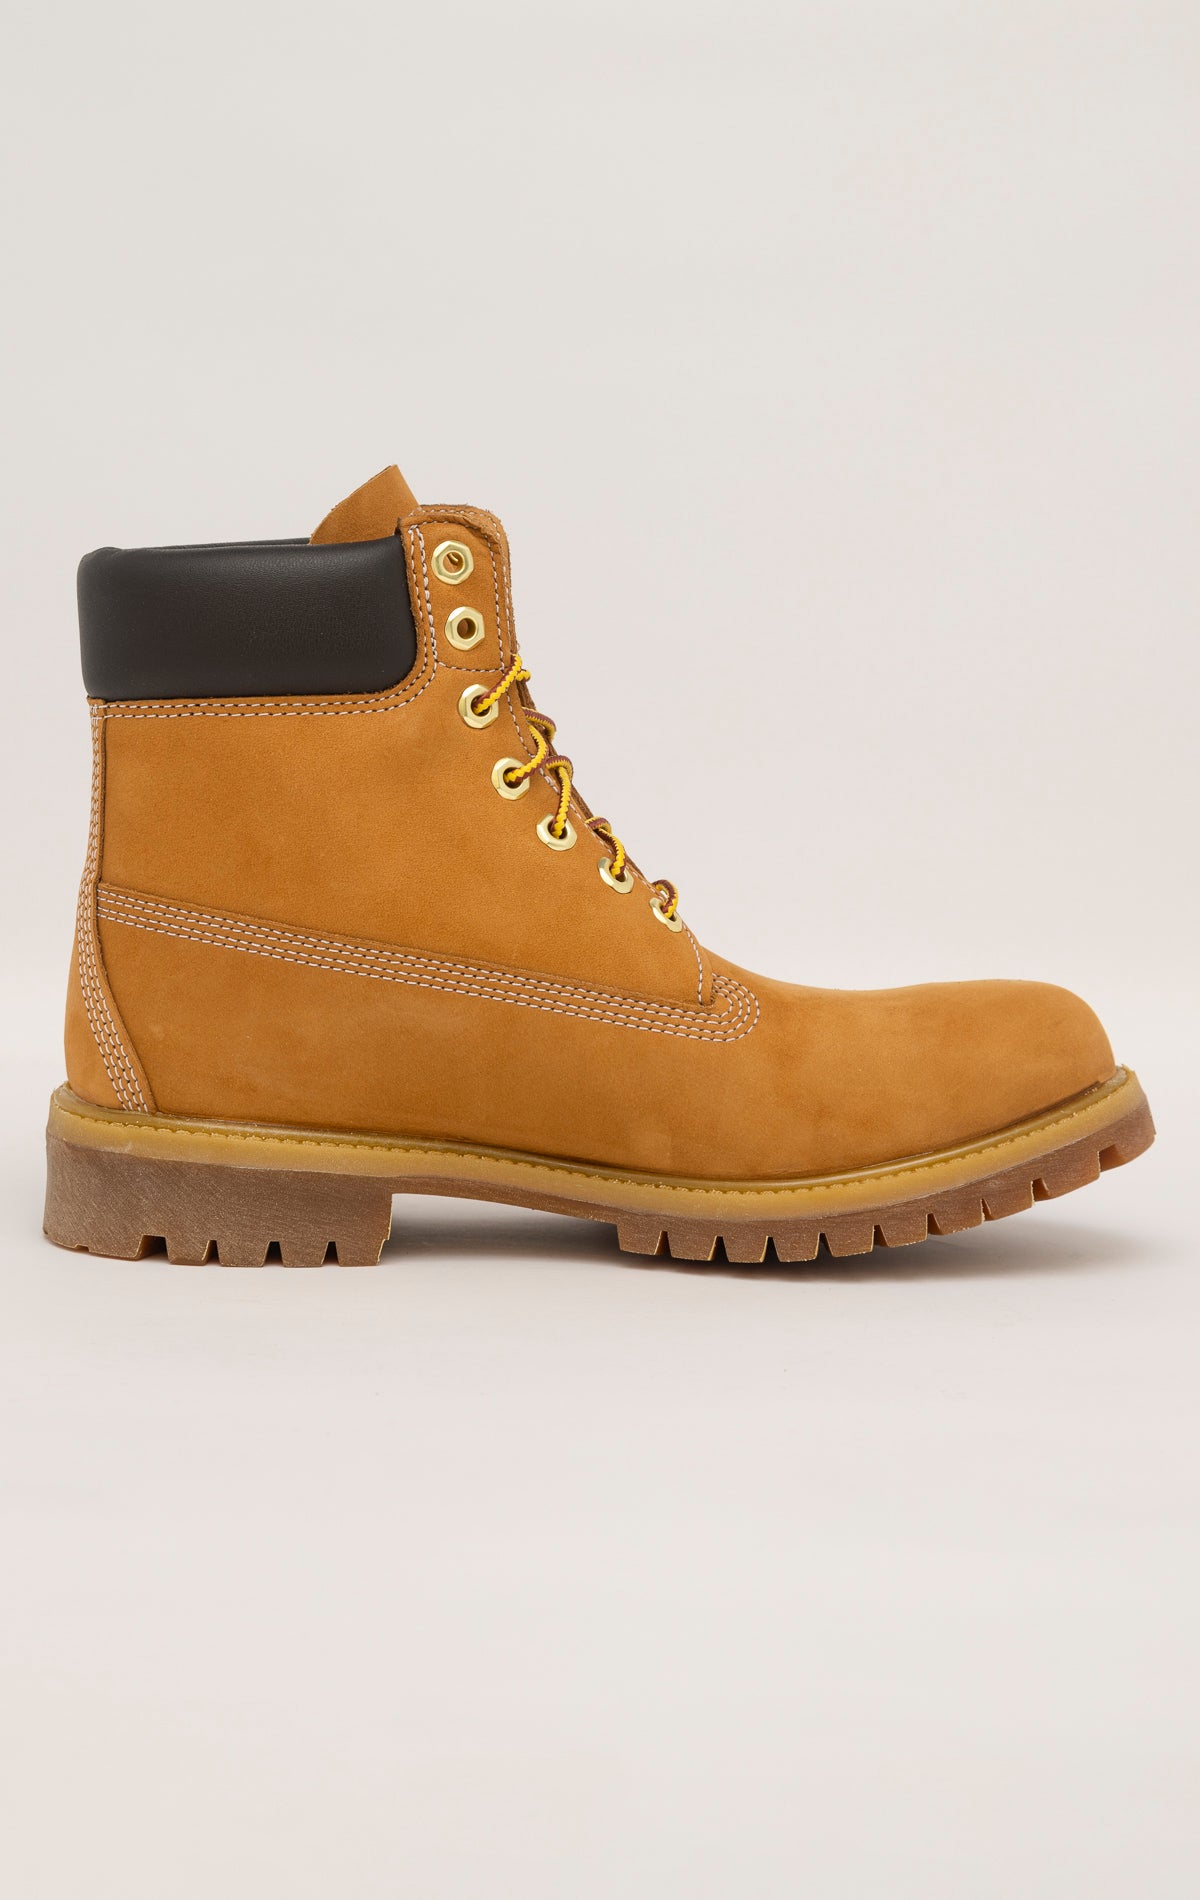 Timberland 6-Inch boots in premium wheat nubuck leather with waterproof construction, padded collar, and lug outsole